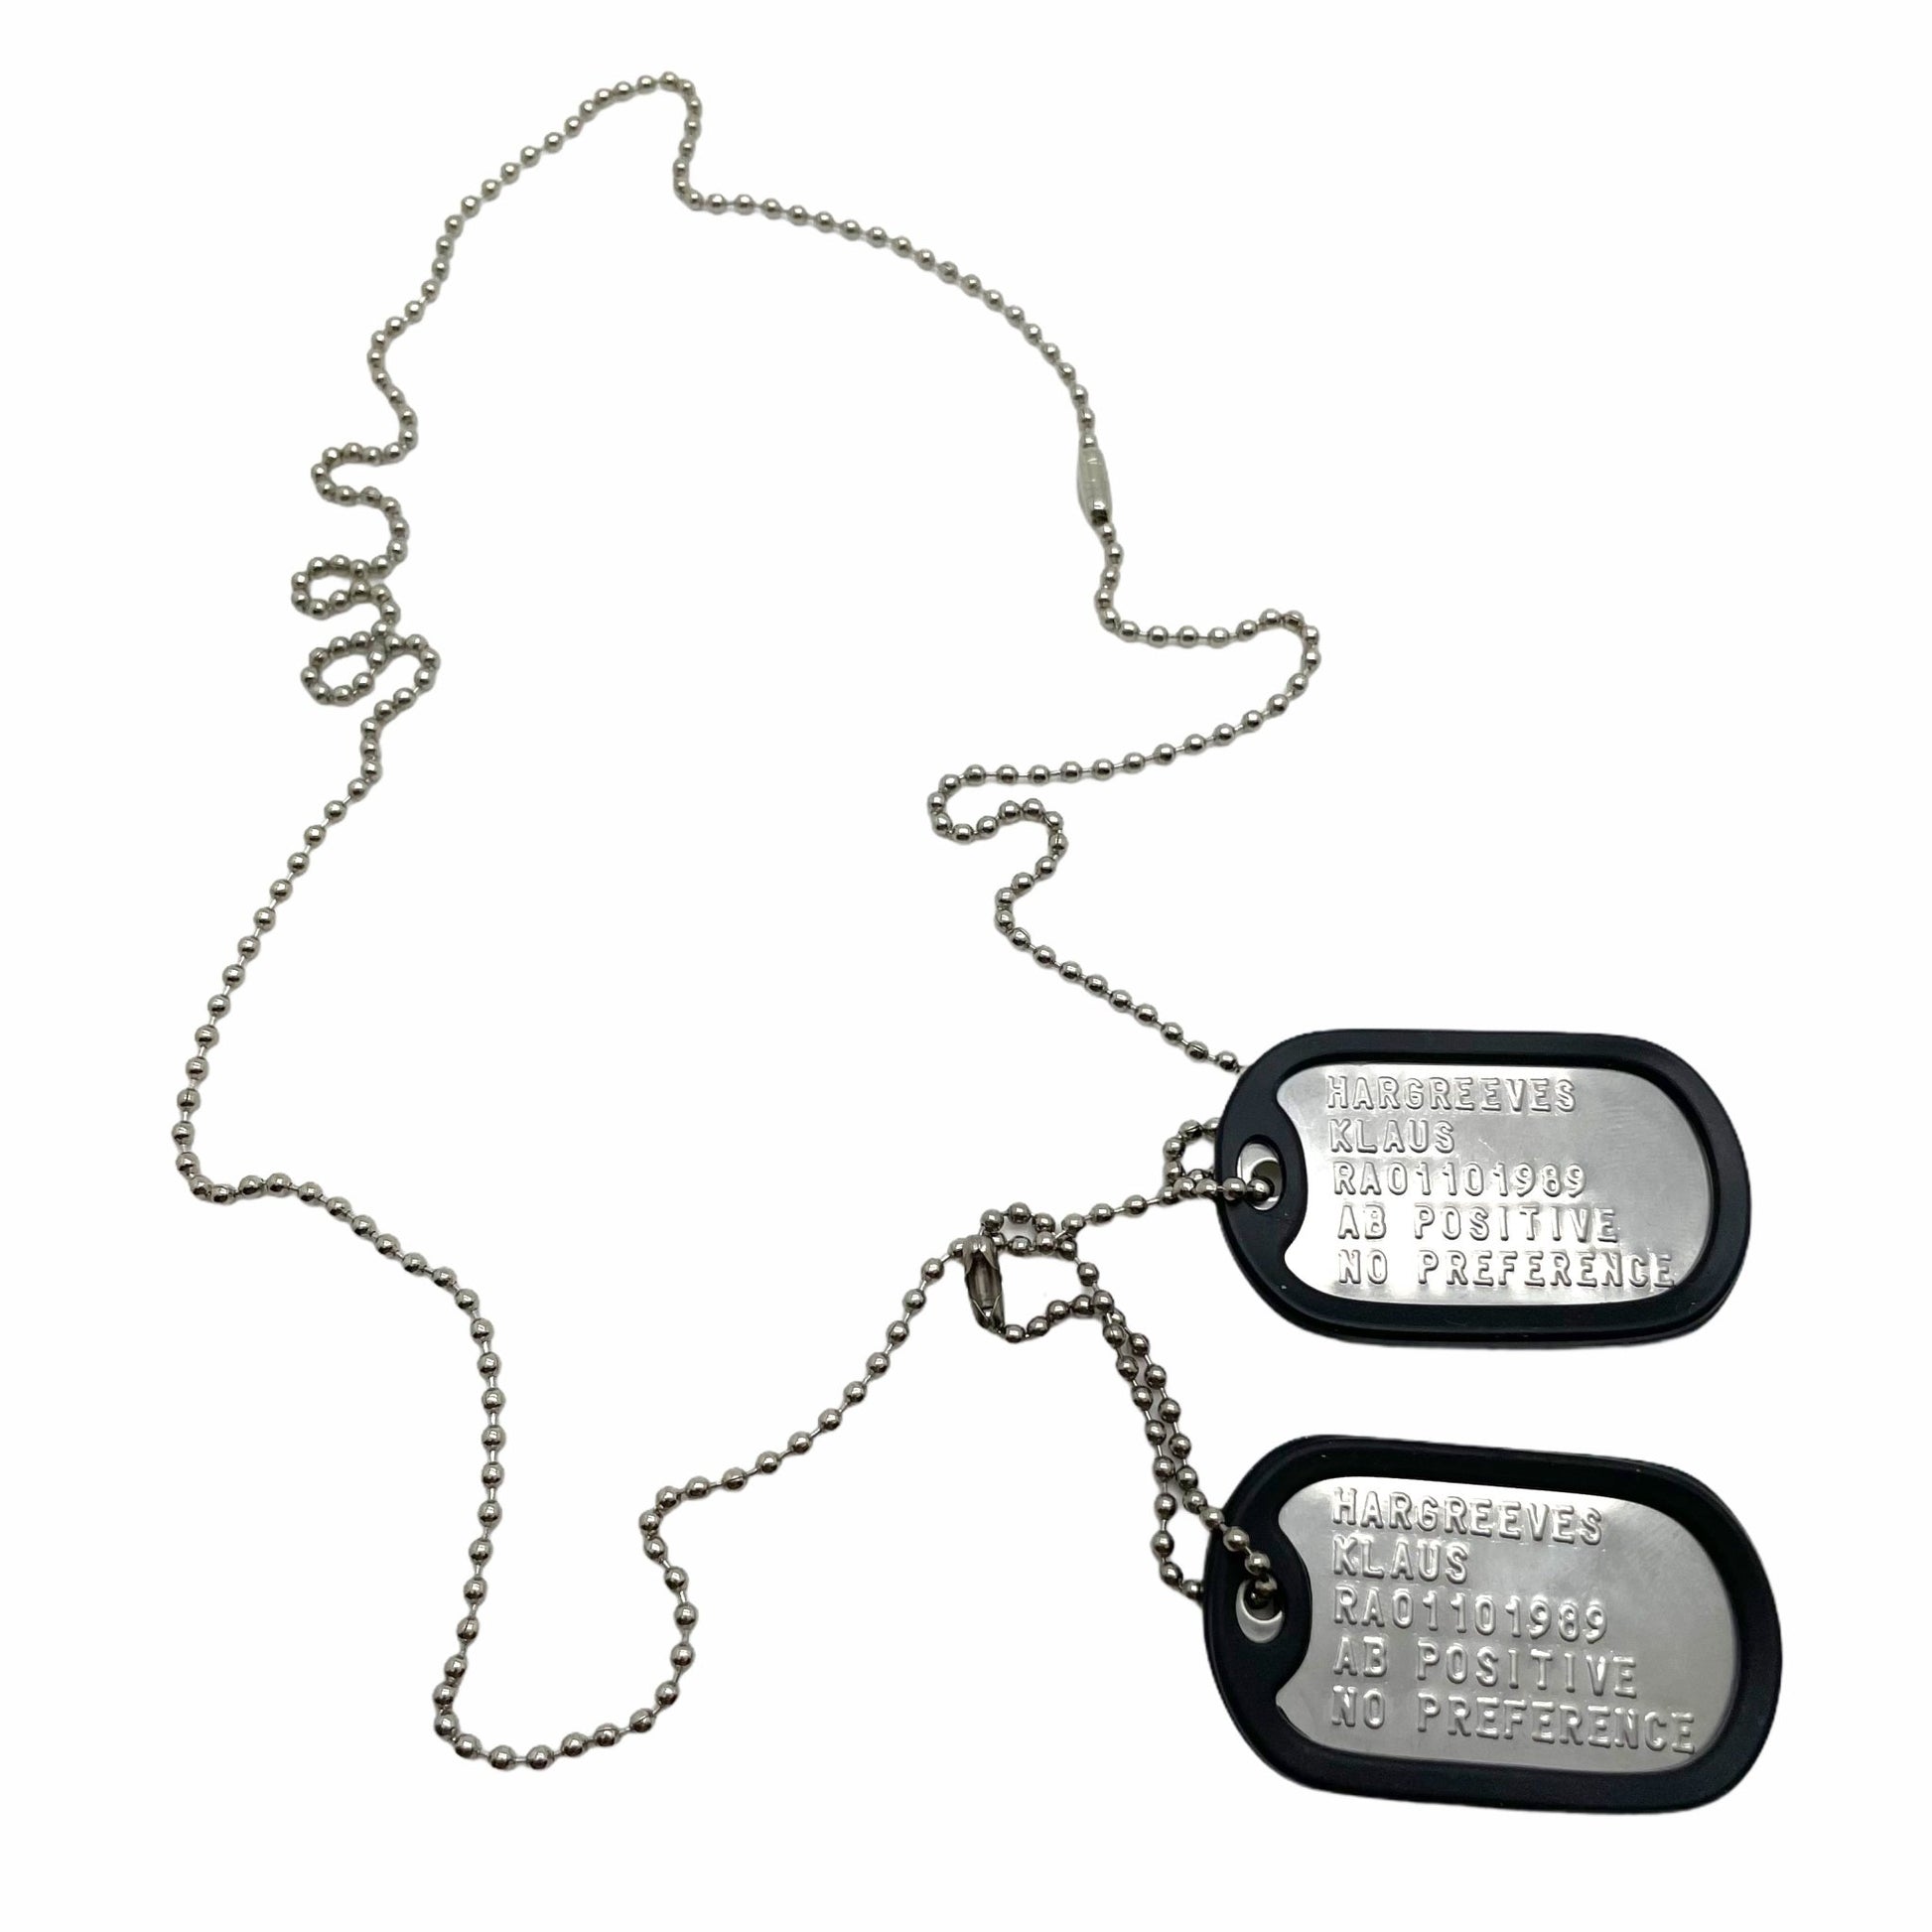 Klaus Hargreeves 'Number Four' Umbrella Academy Military Dog Tags Prop Replica - Stainless Steel - Chain&Silencers Included - TheDogTagCo